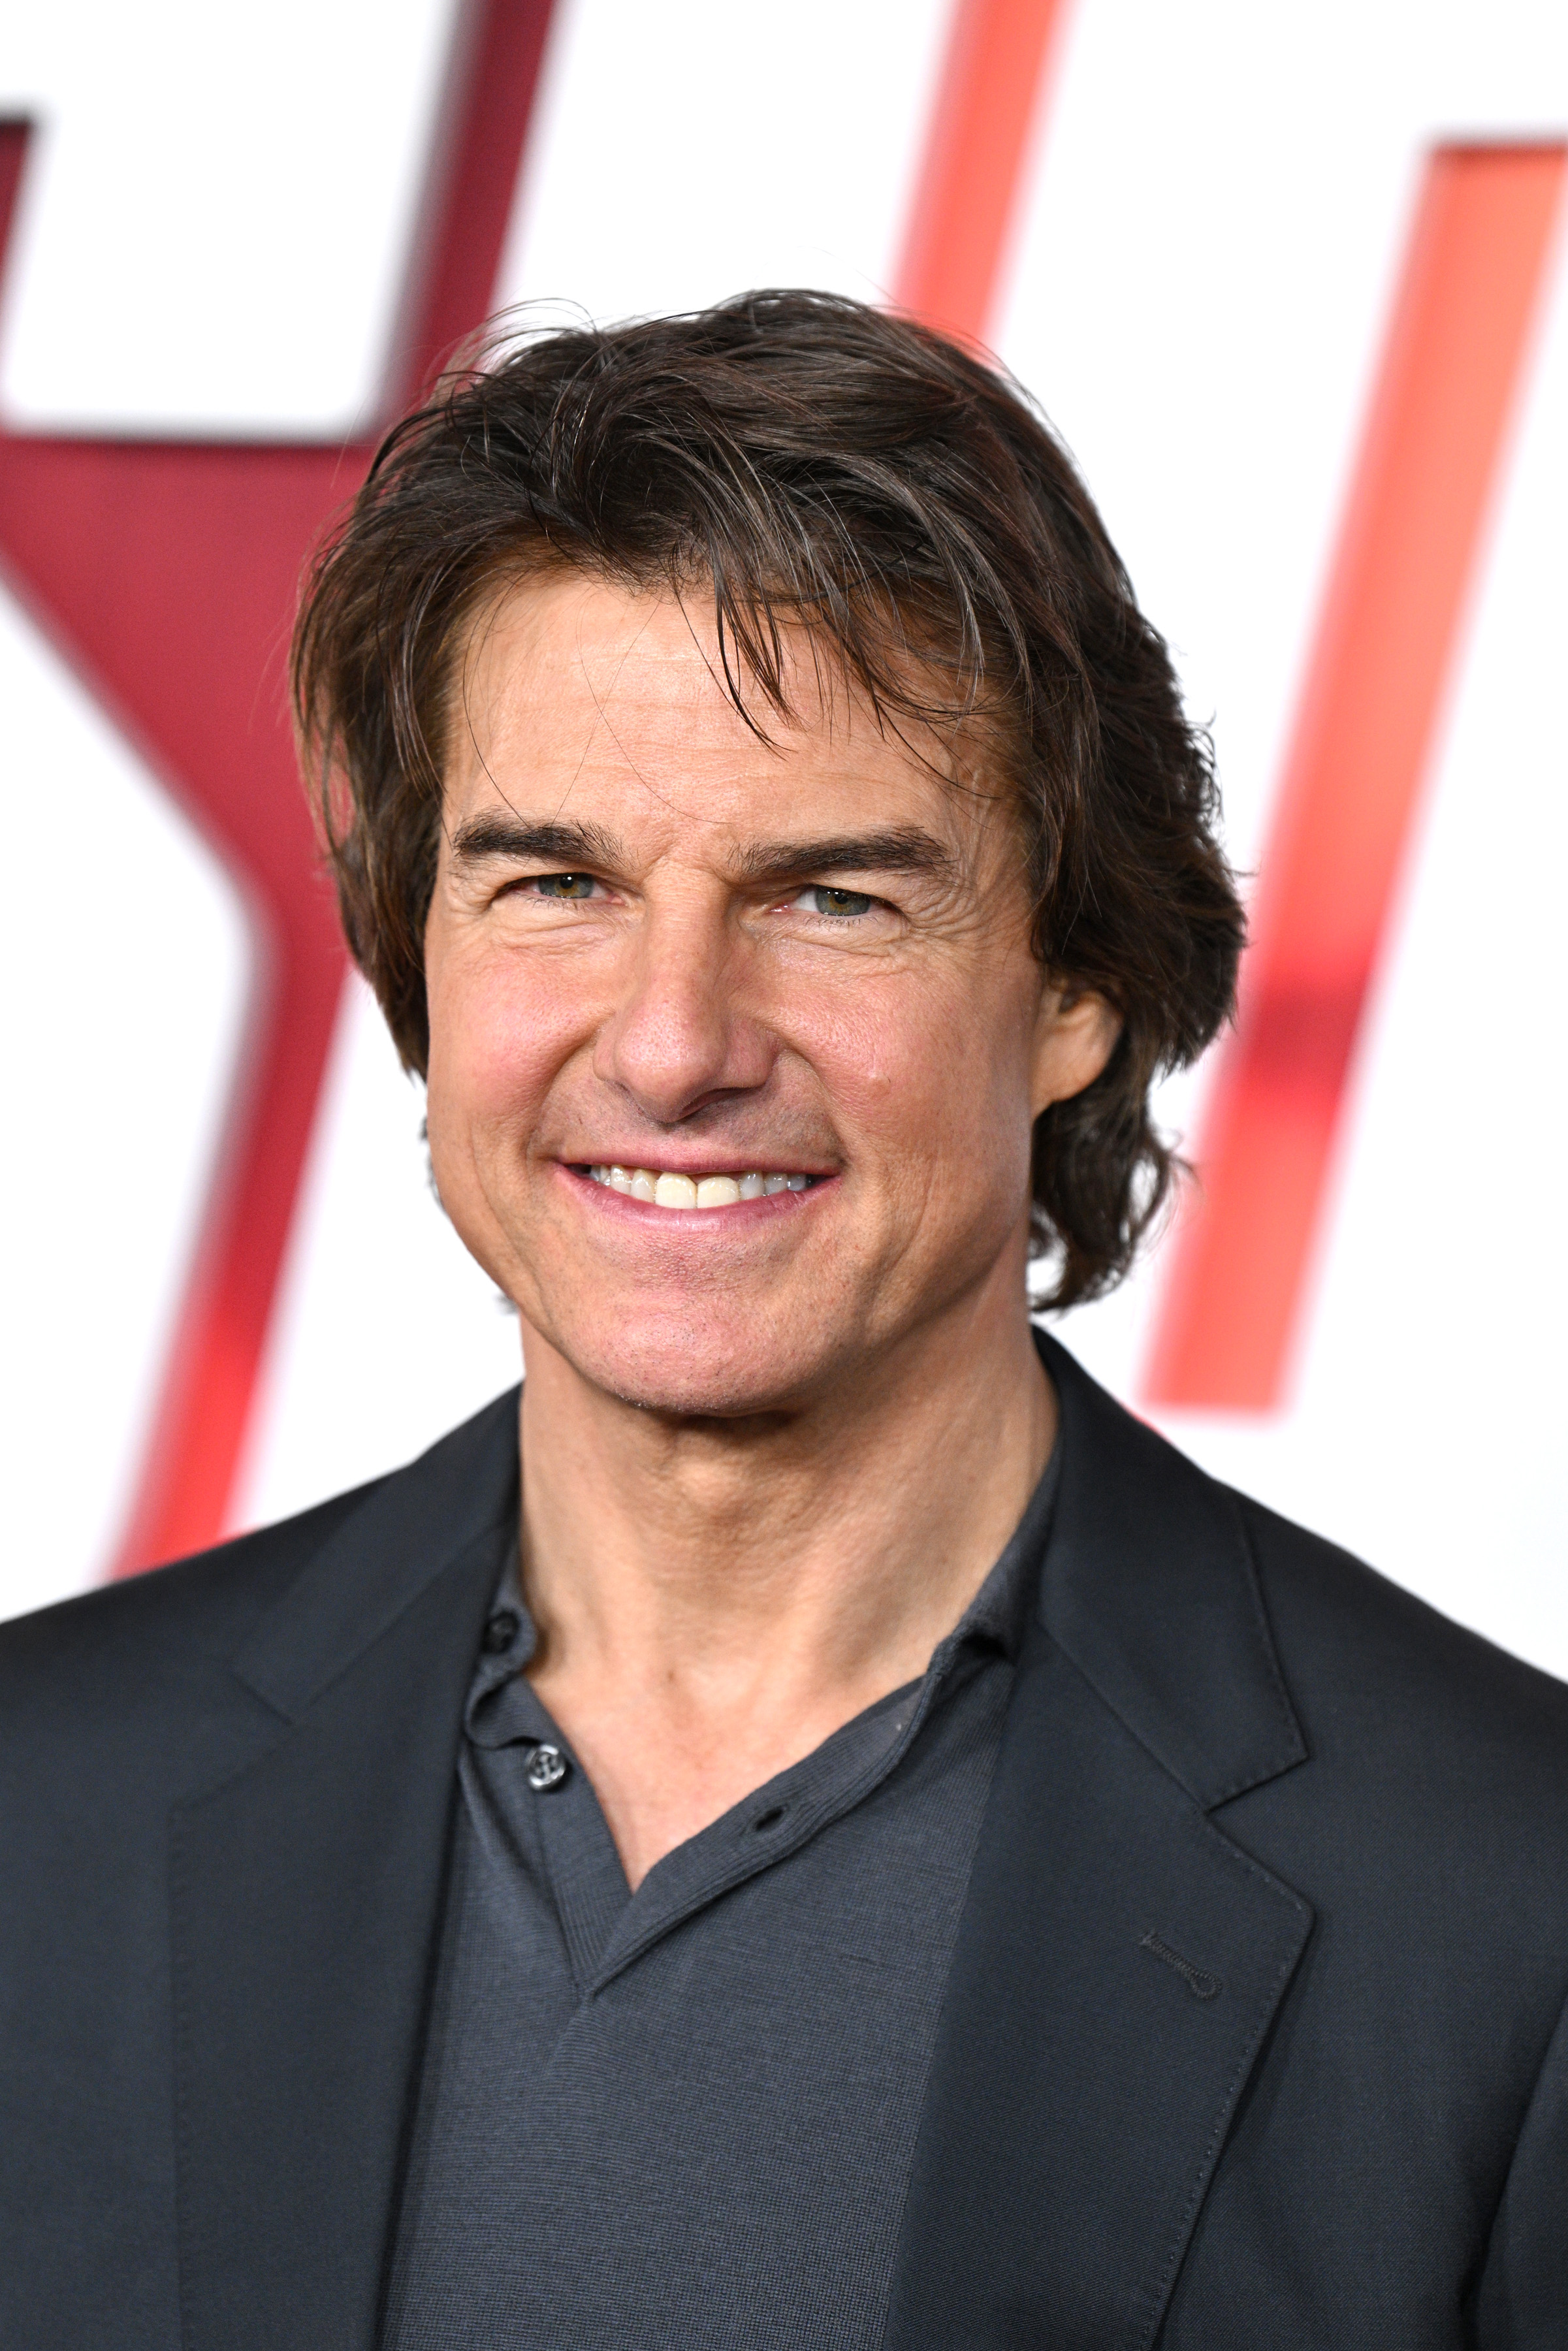 Tom Cruise attends the US premiere of "Mission: Impossible - Dead Reckoning Part One" on July 10, 2023, in New York, New York. | Source: Getty Images